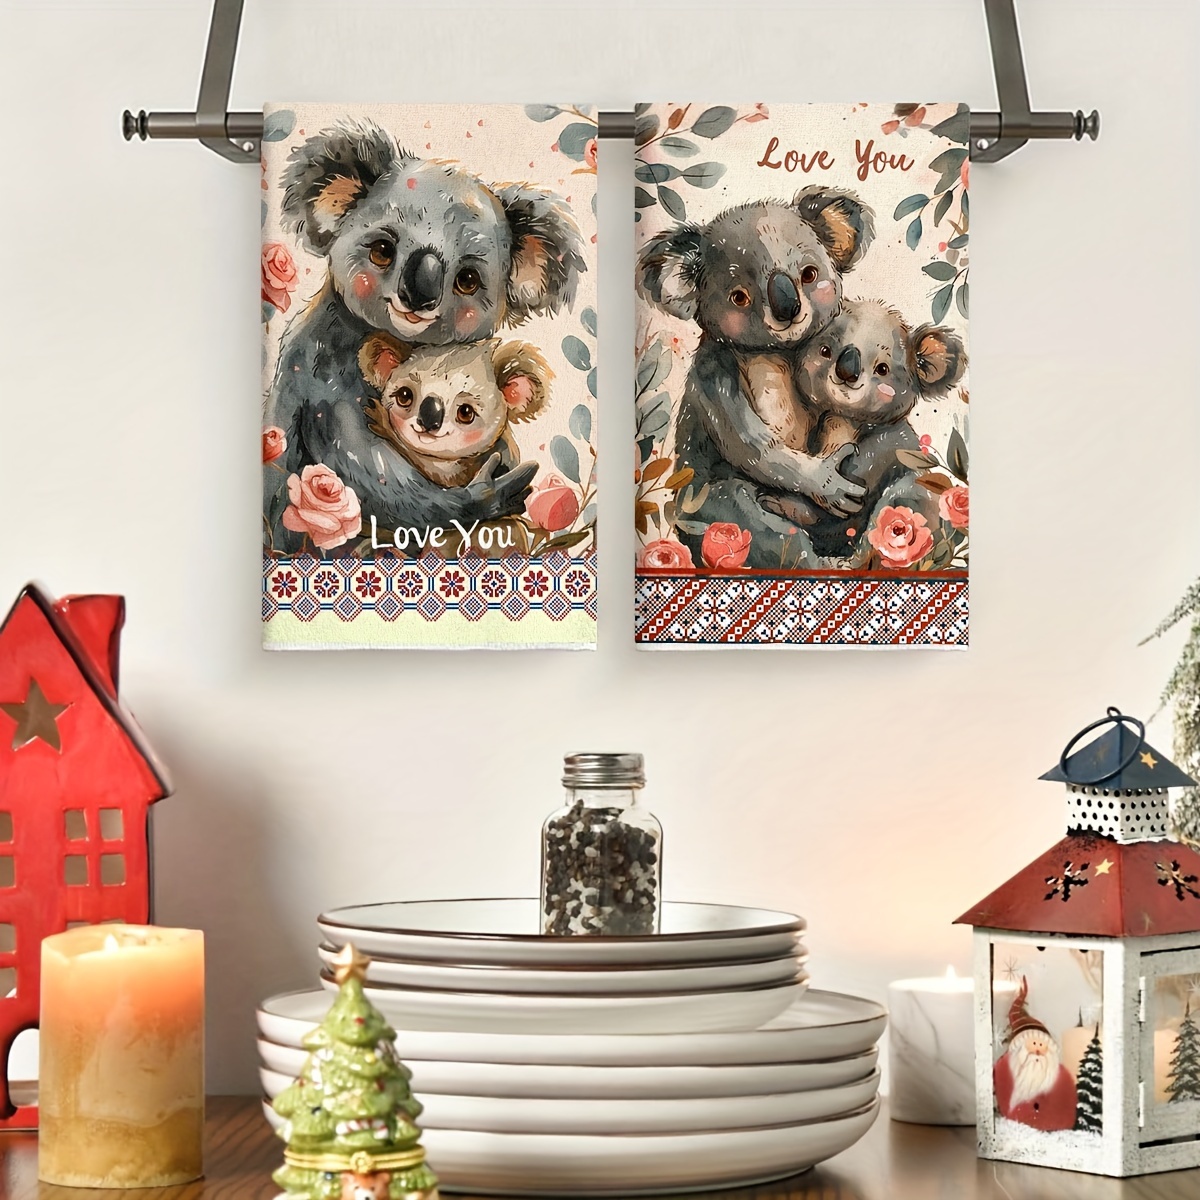 

2-piece Ultra Absorbent Microfiber Kitchen Towels - Cute Koala Cartoon Design, Perfect For Cooking & Baking, Machine Washable